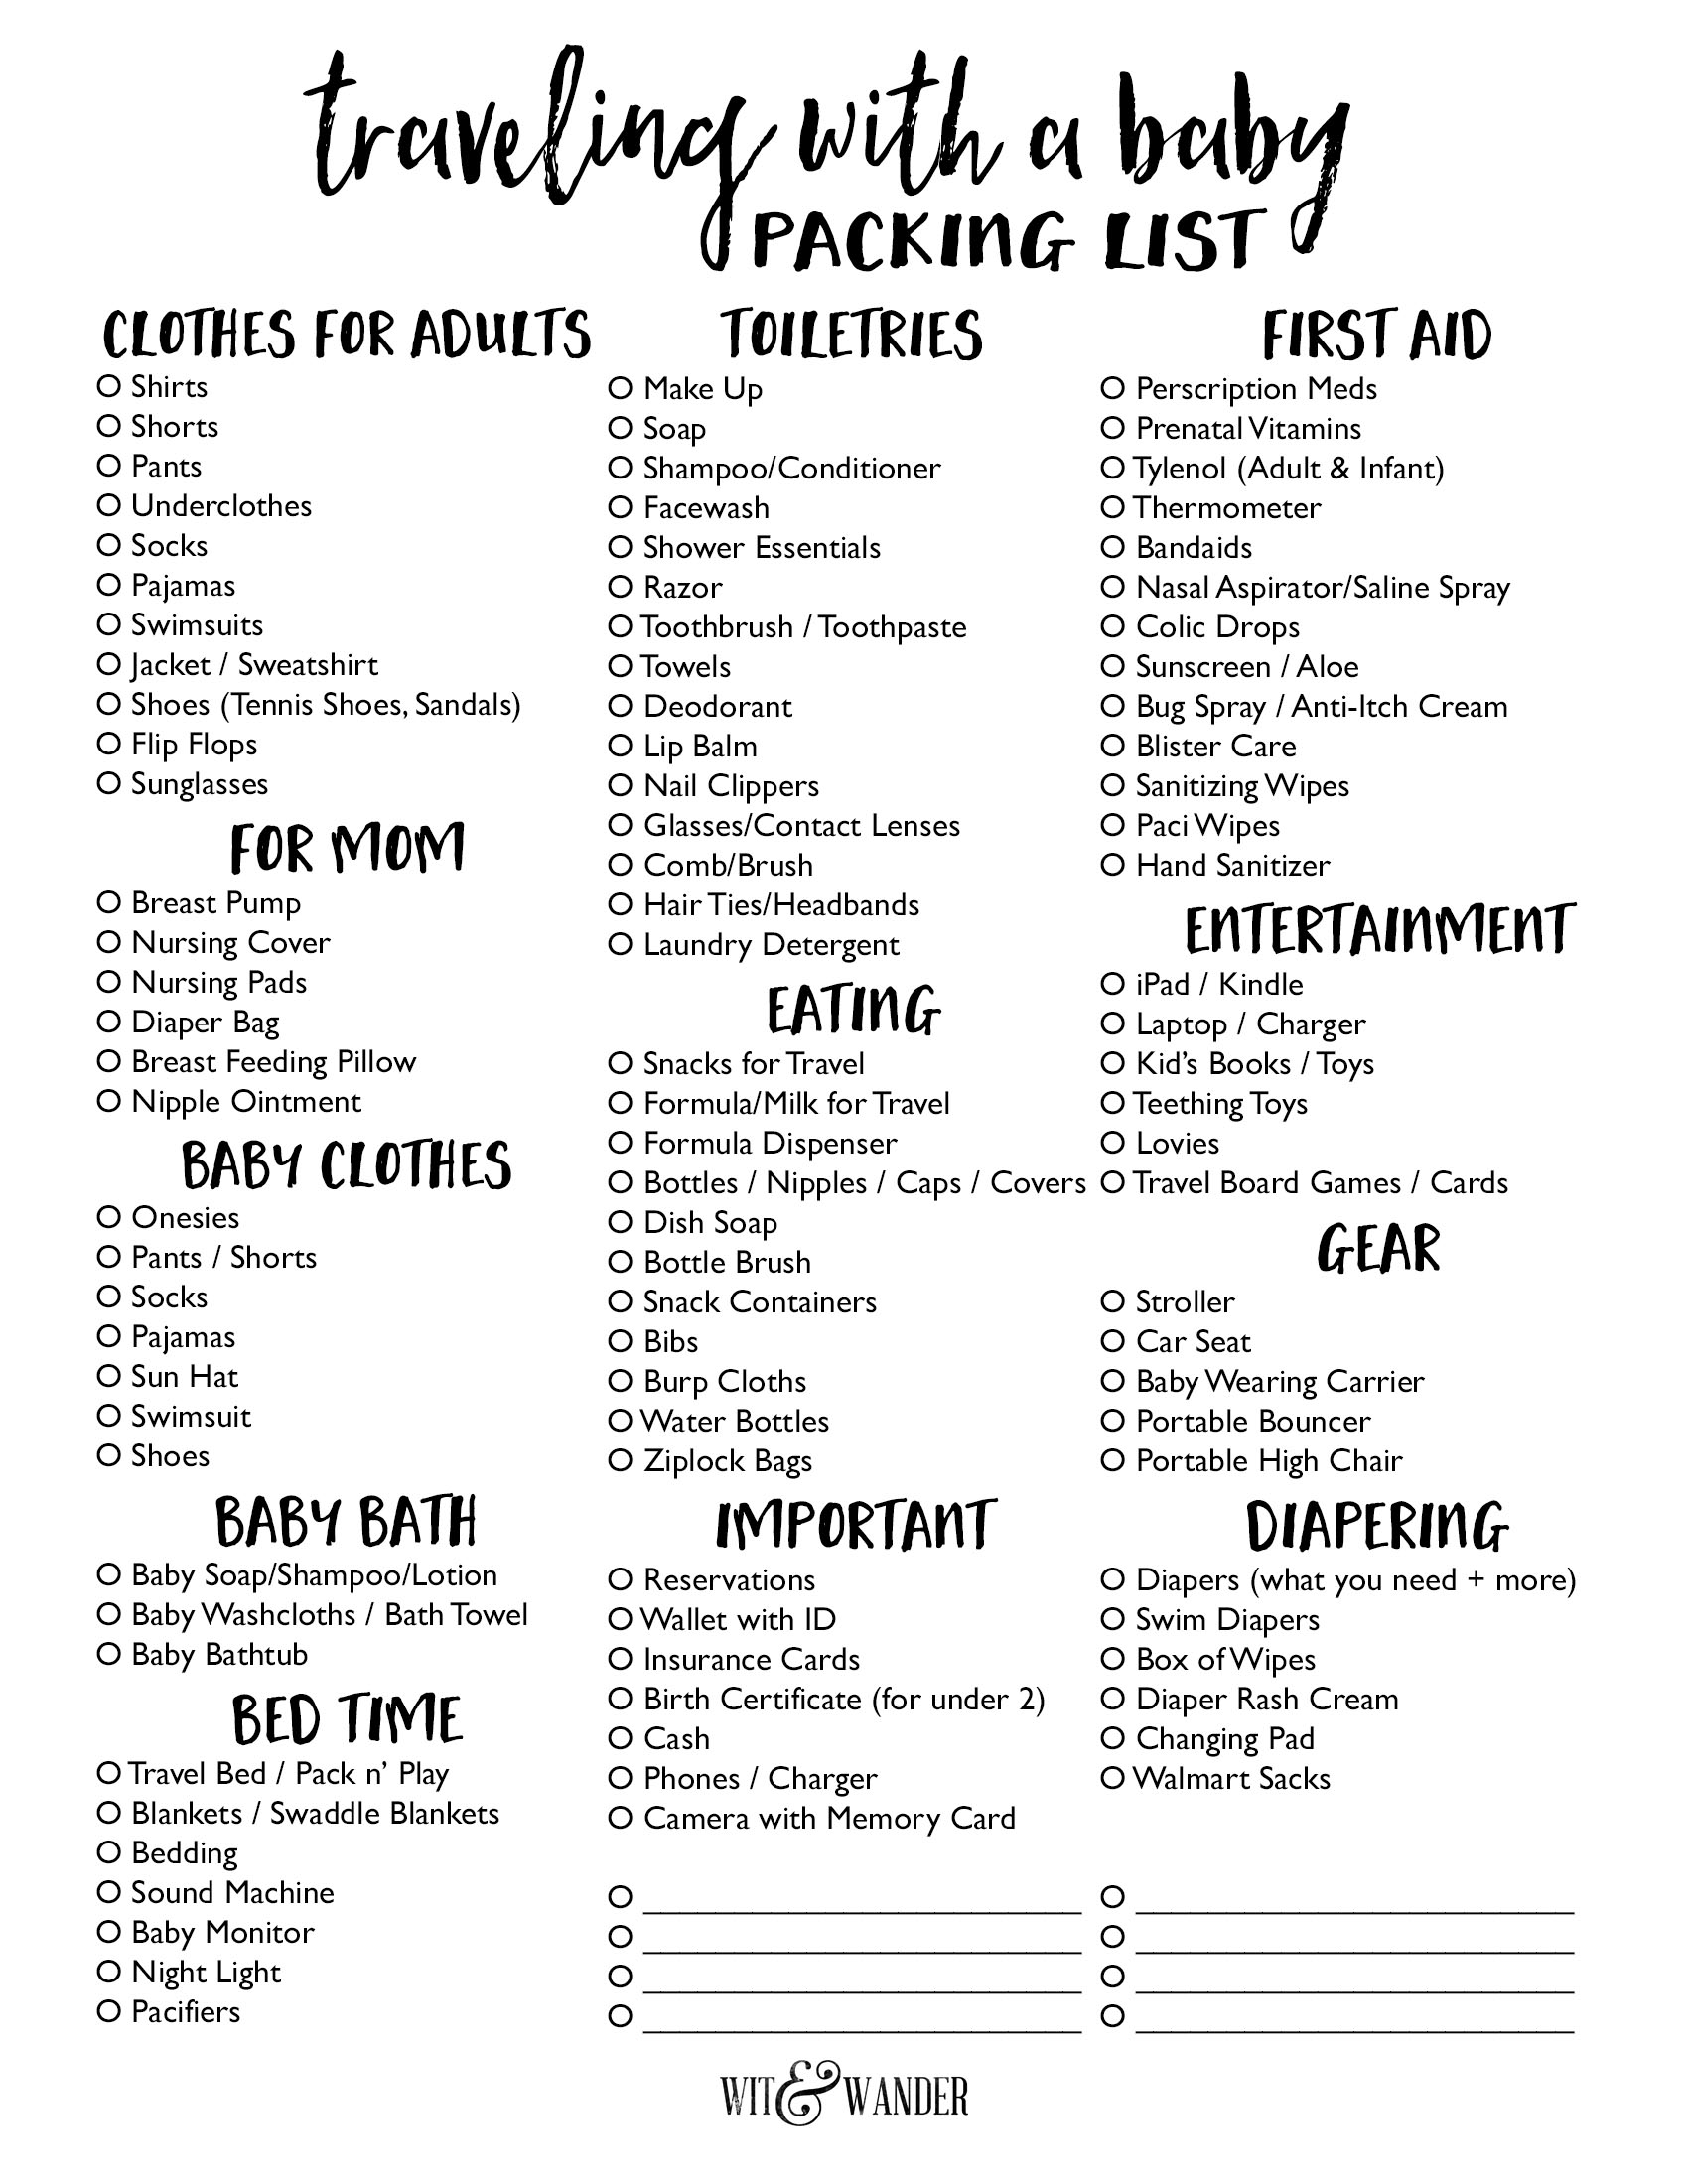 packing checklist for vacation